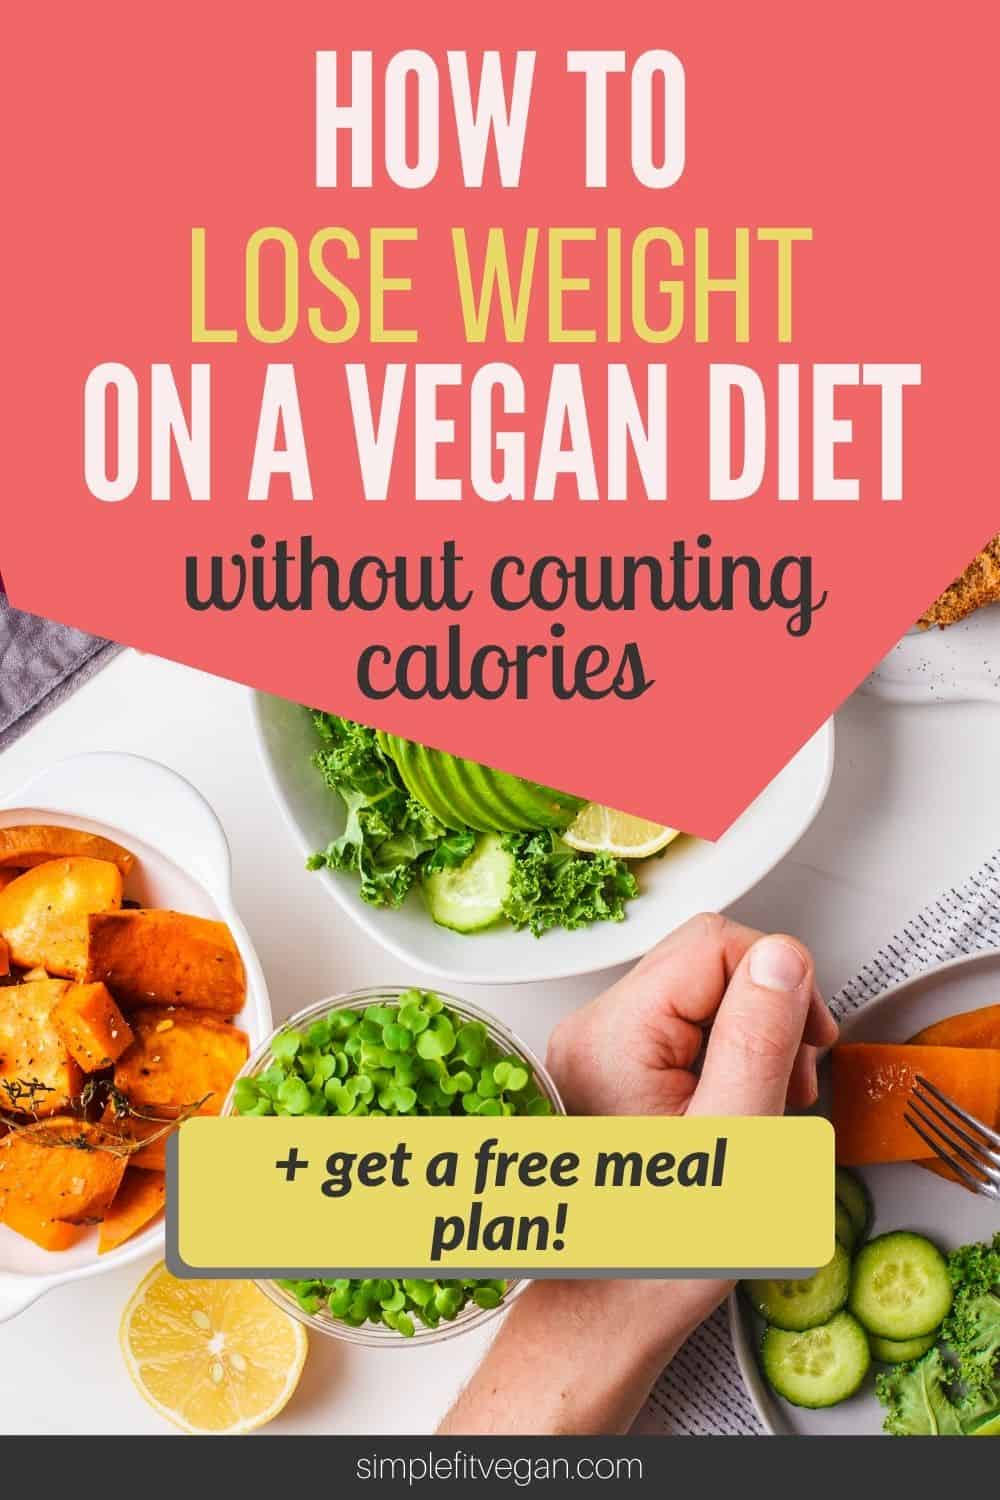 How To Lose Weight On A Vegan Diet Without Counting Calories